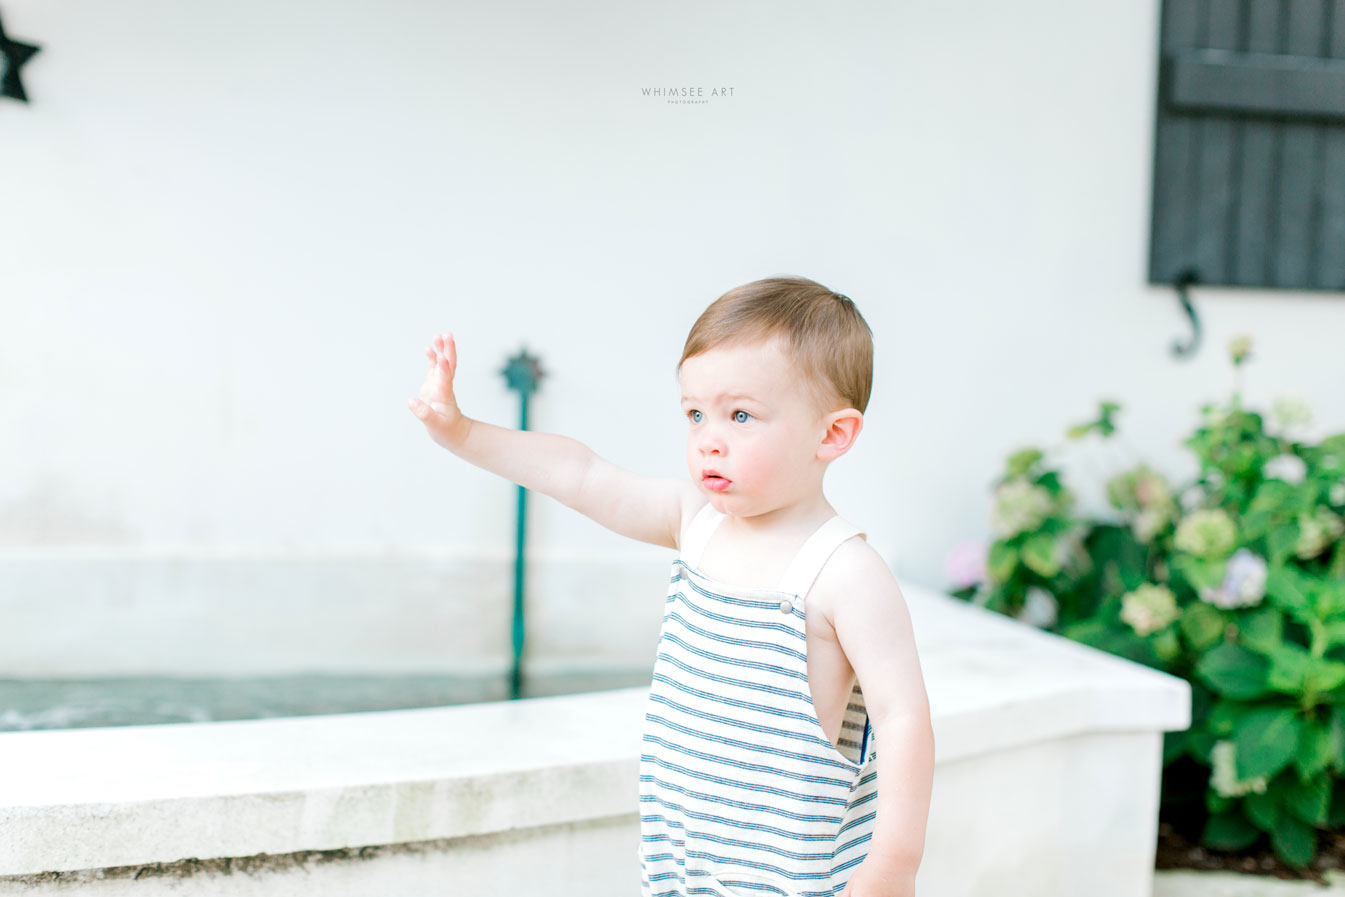 Travel Photography | Alys Beach, FL Family Photo Session | Whimsee Art Photography